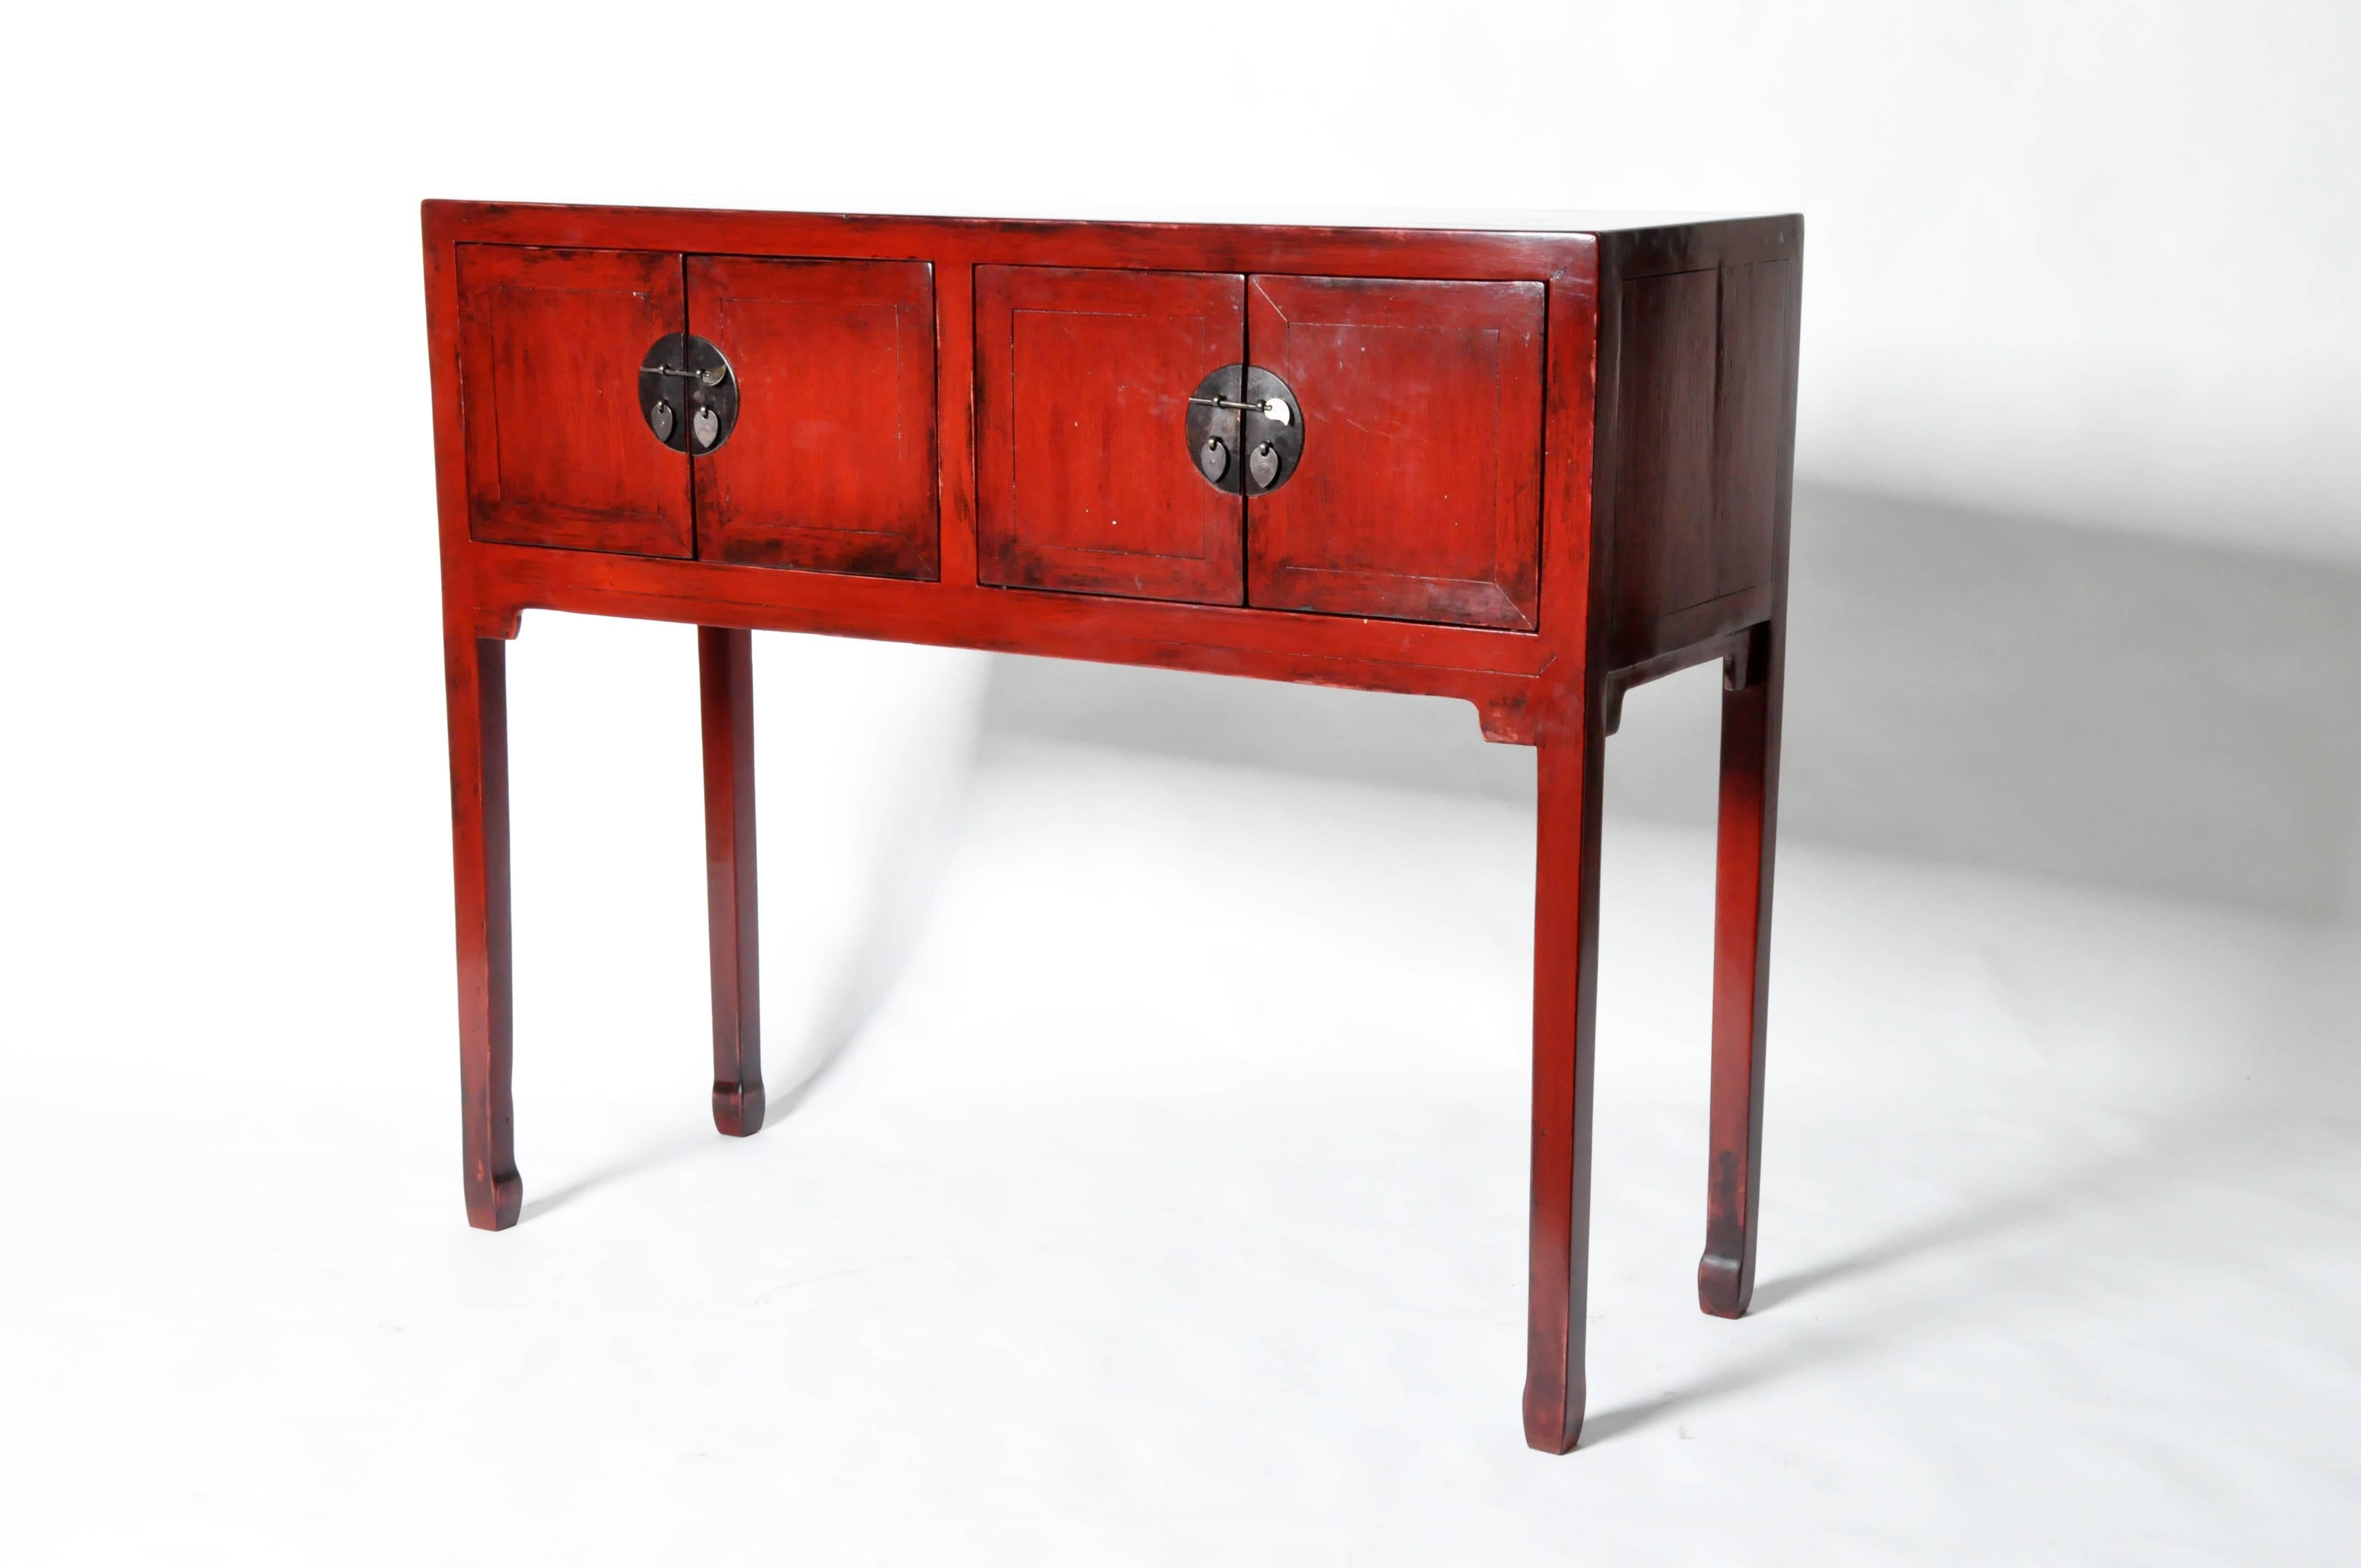 restoring chinese lacquer furniture